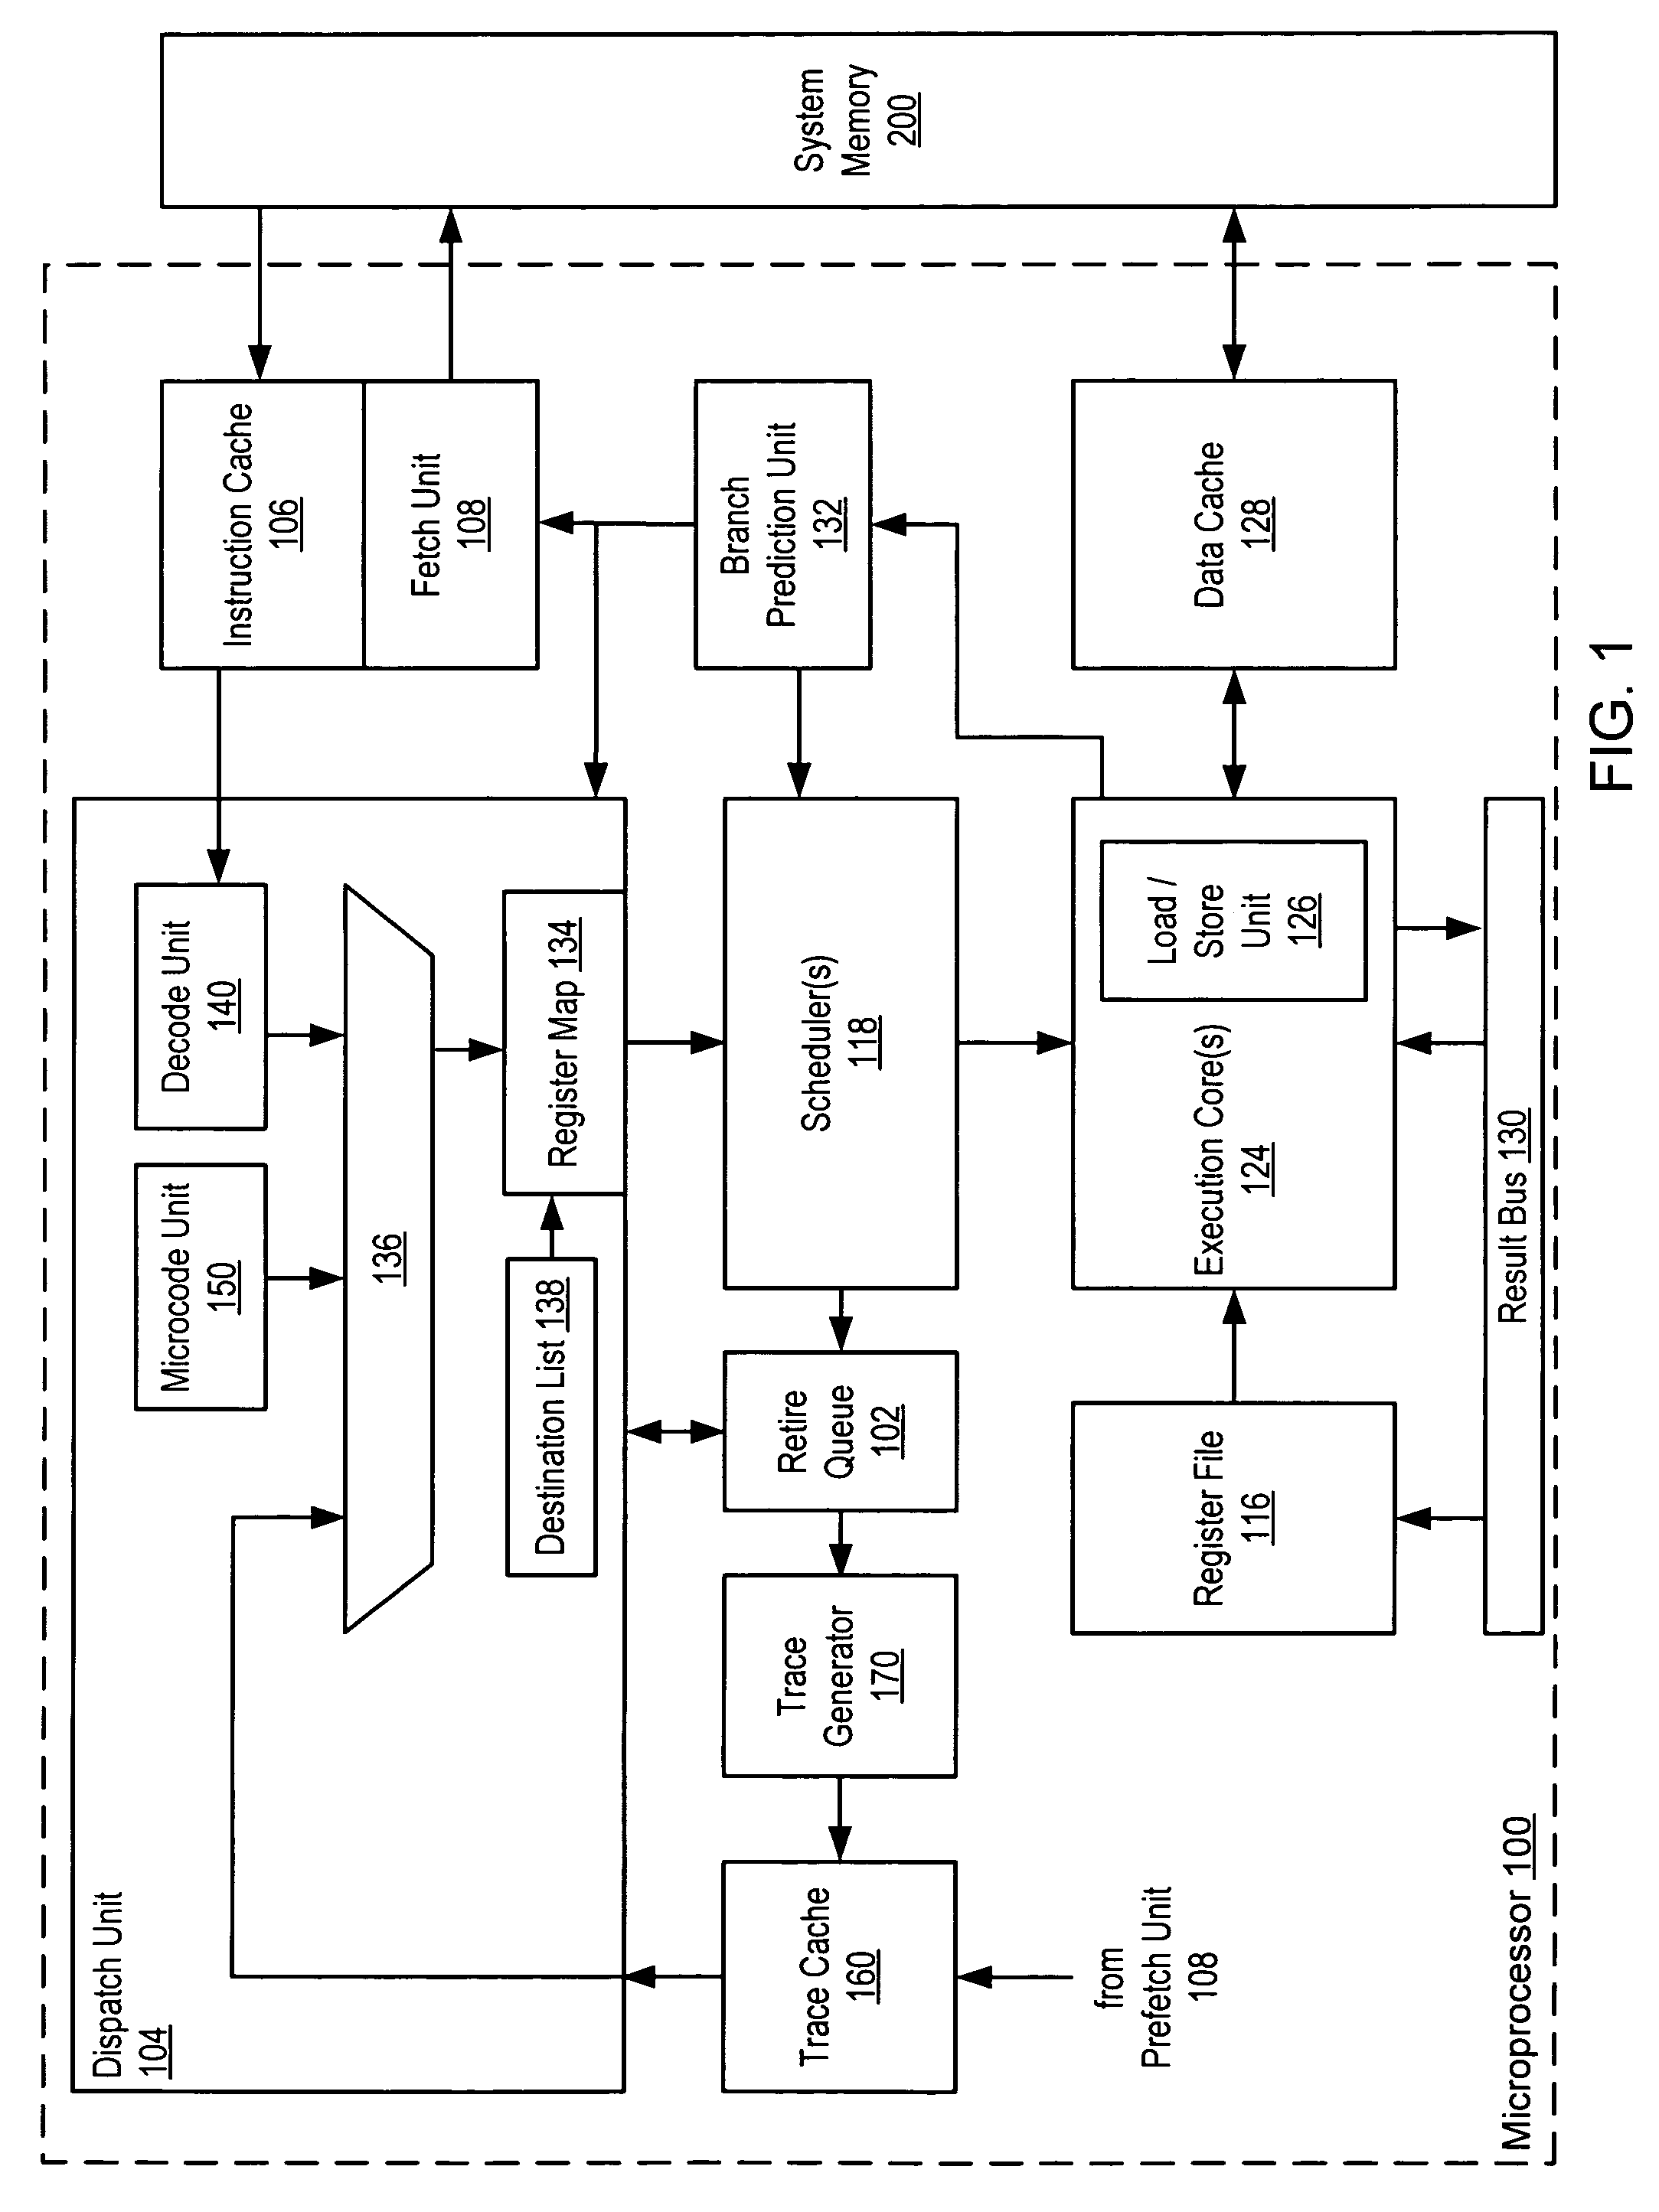 Method and system for changing the executable status of an operation following a branch misprediction without refetching the operation